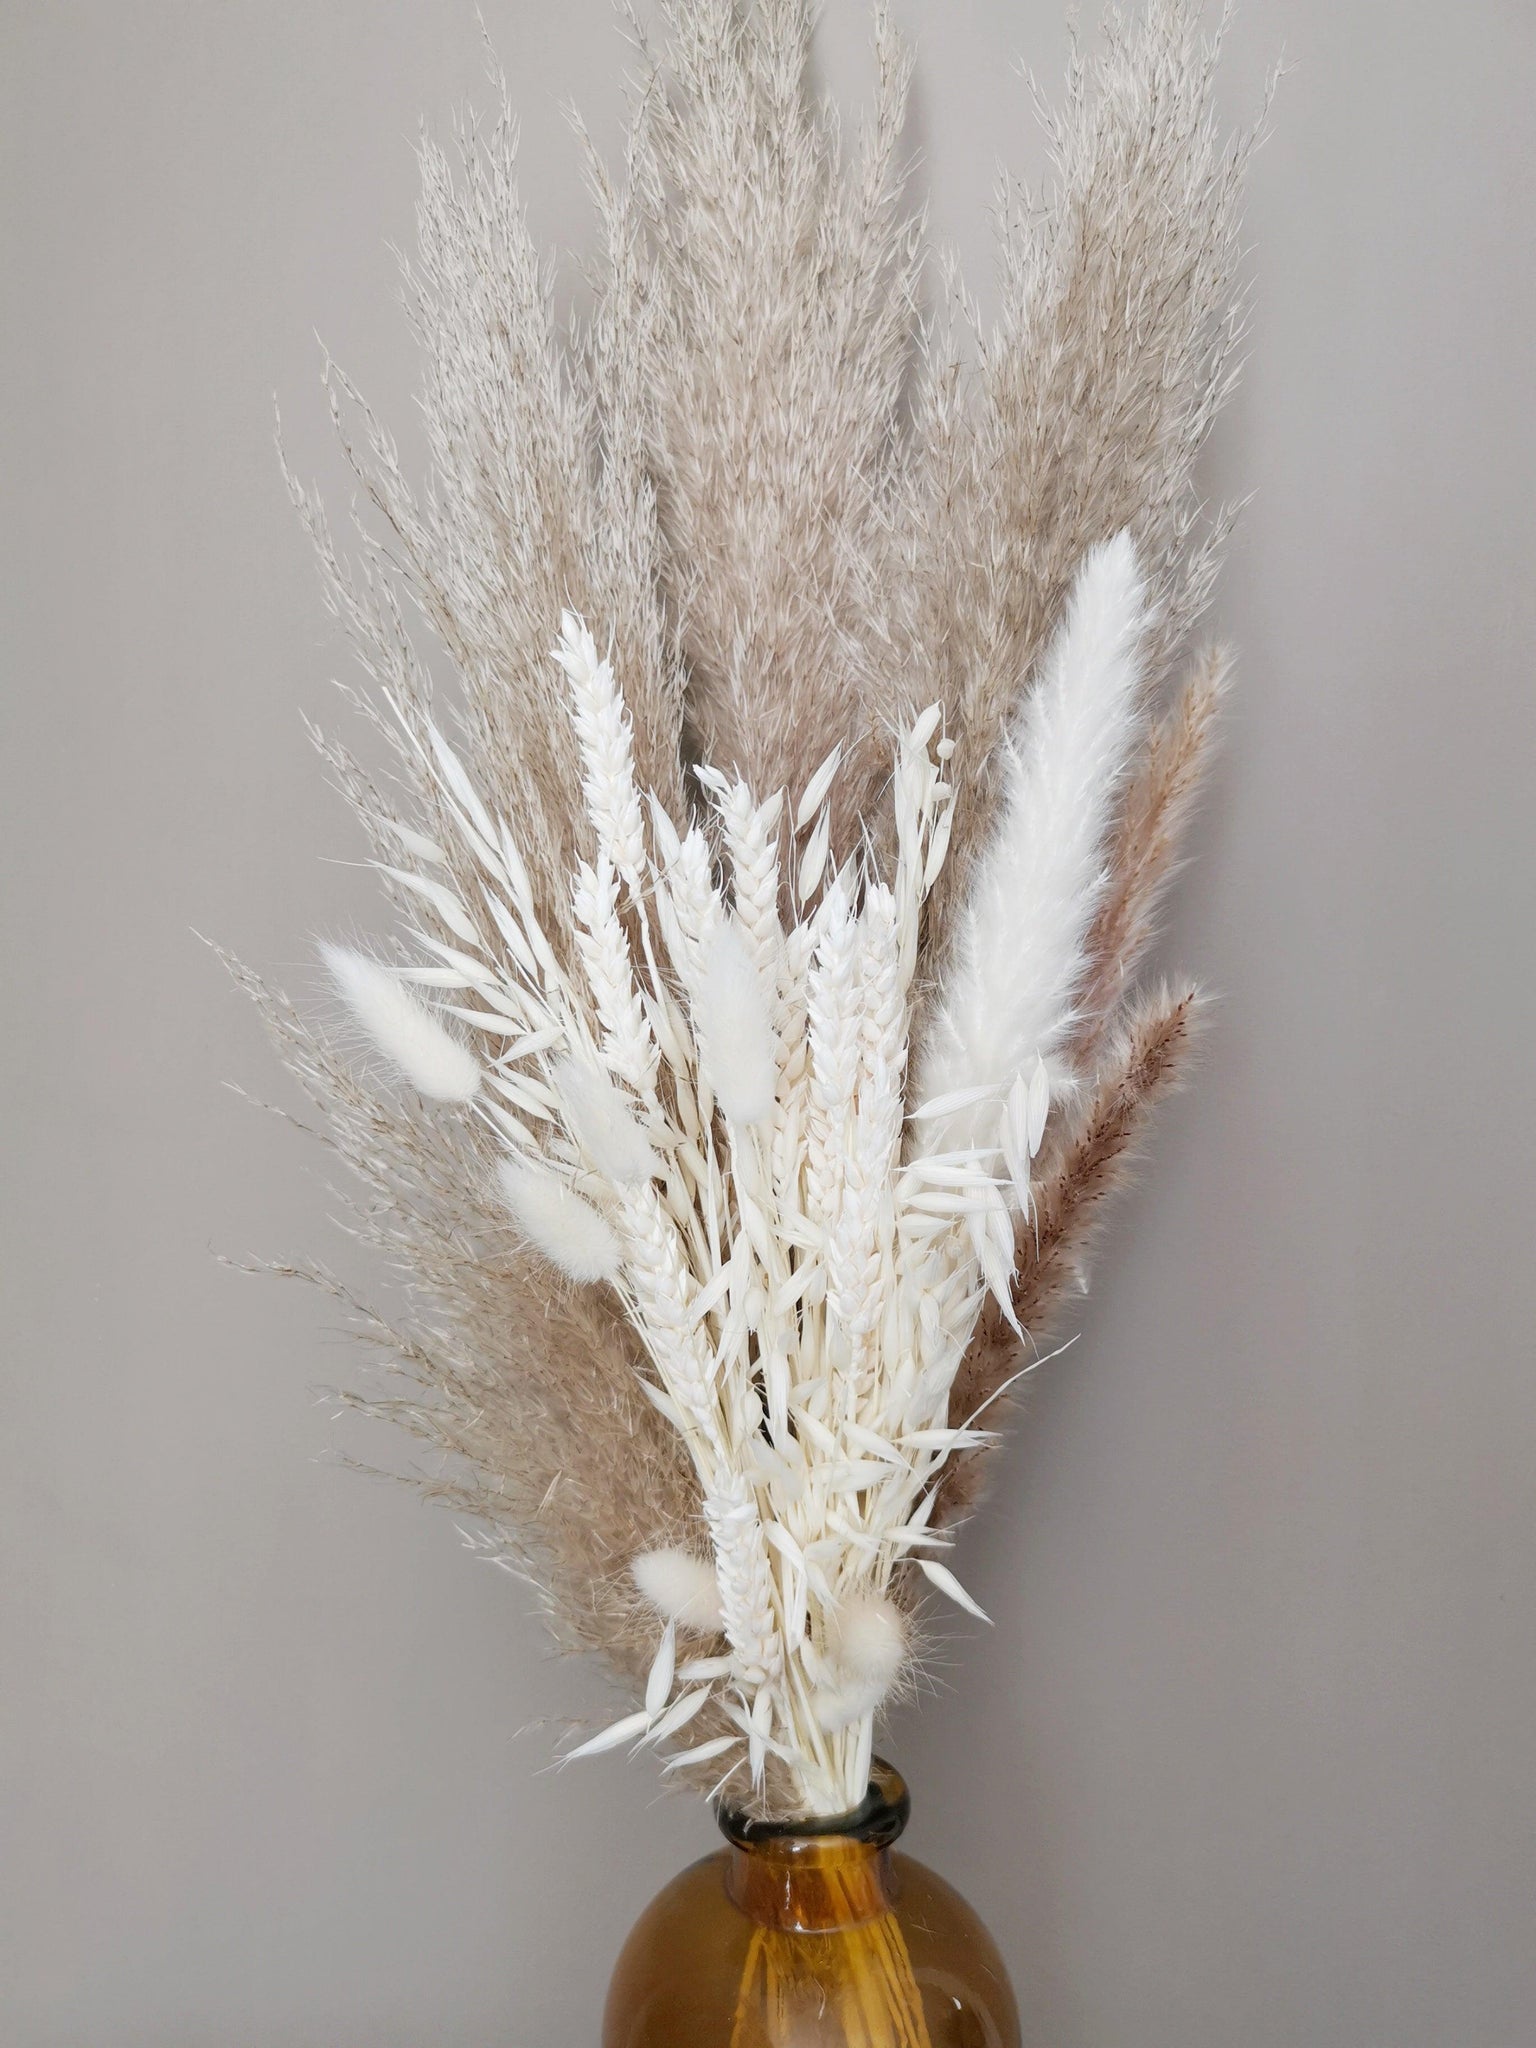 THE WHITES Small mixed dried pampas grass bouquet